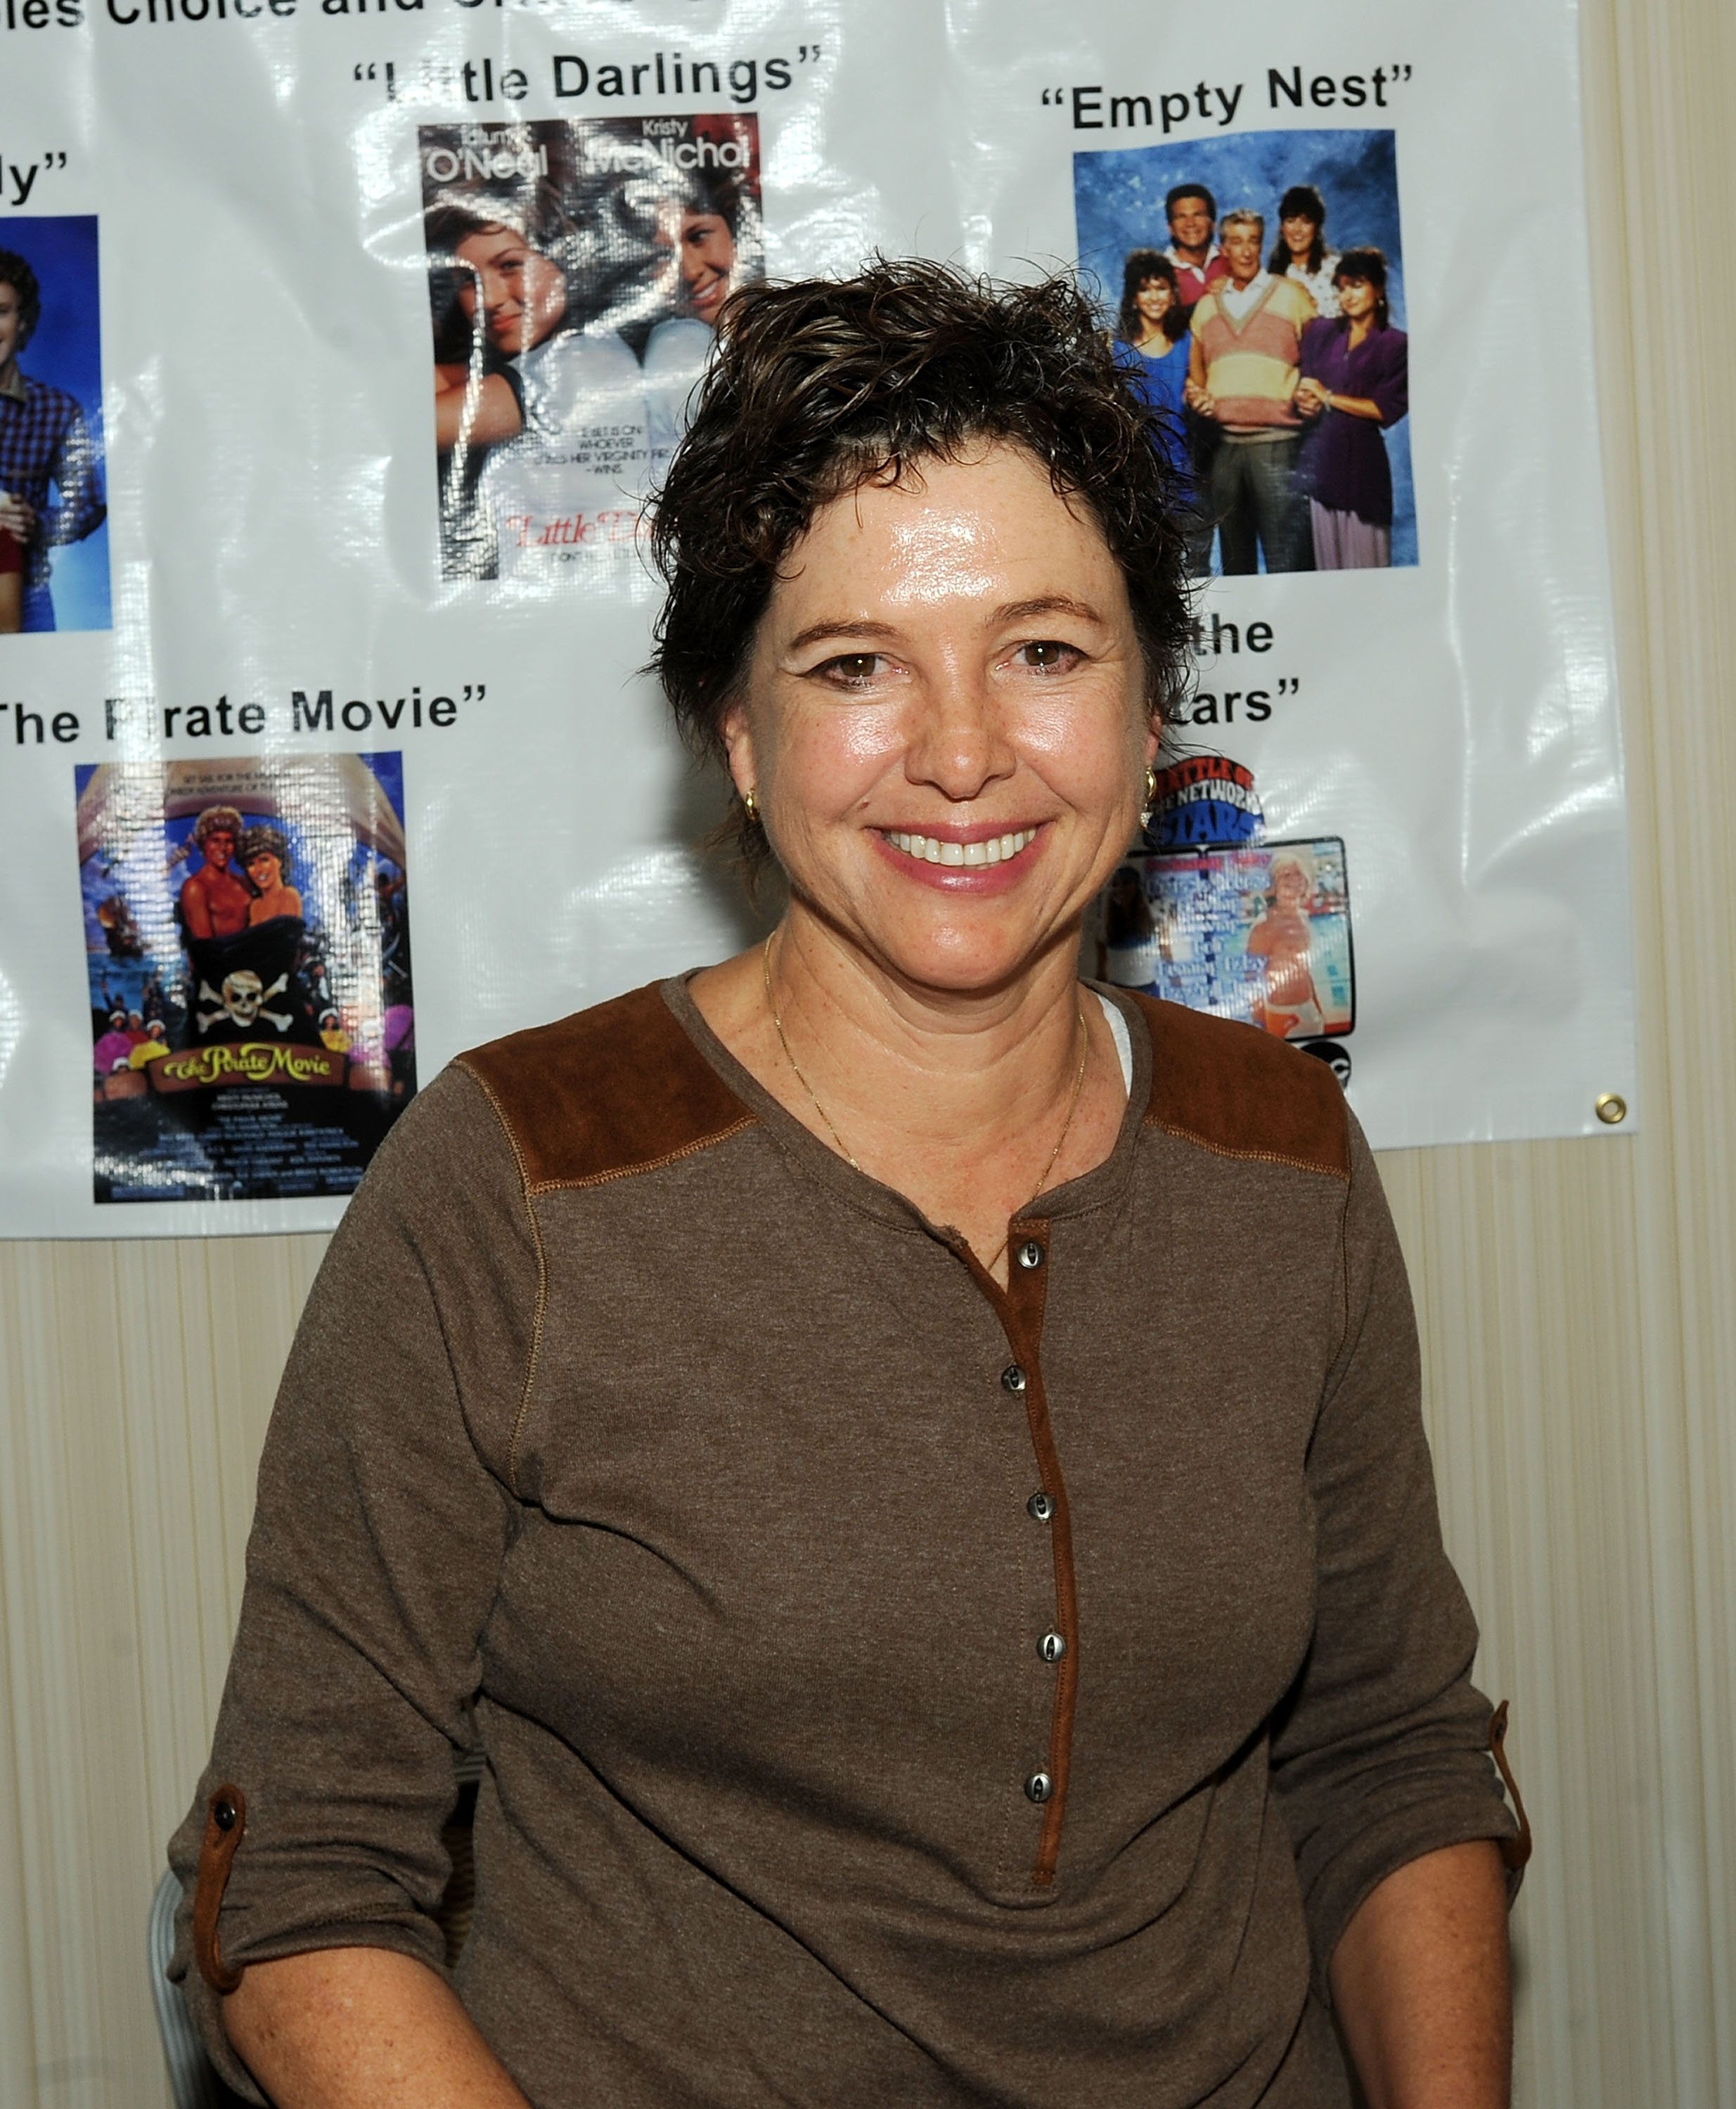  Kristy McNichol attends Day 1 of the Chiller Theatre Expo at Sheraton Parsippany Hotel. | Source: Getty Images